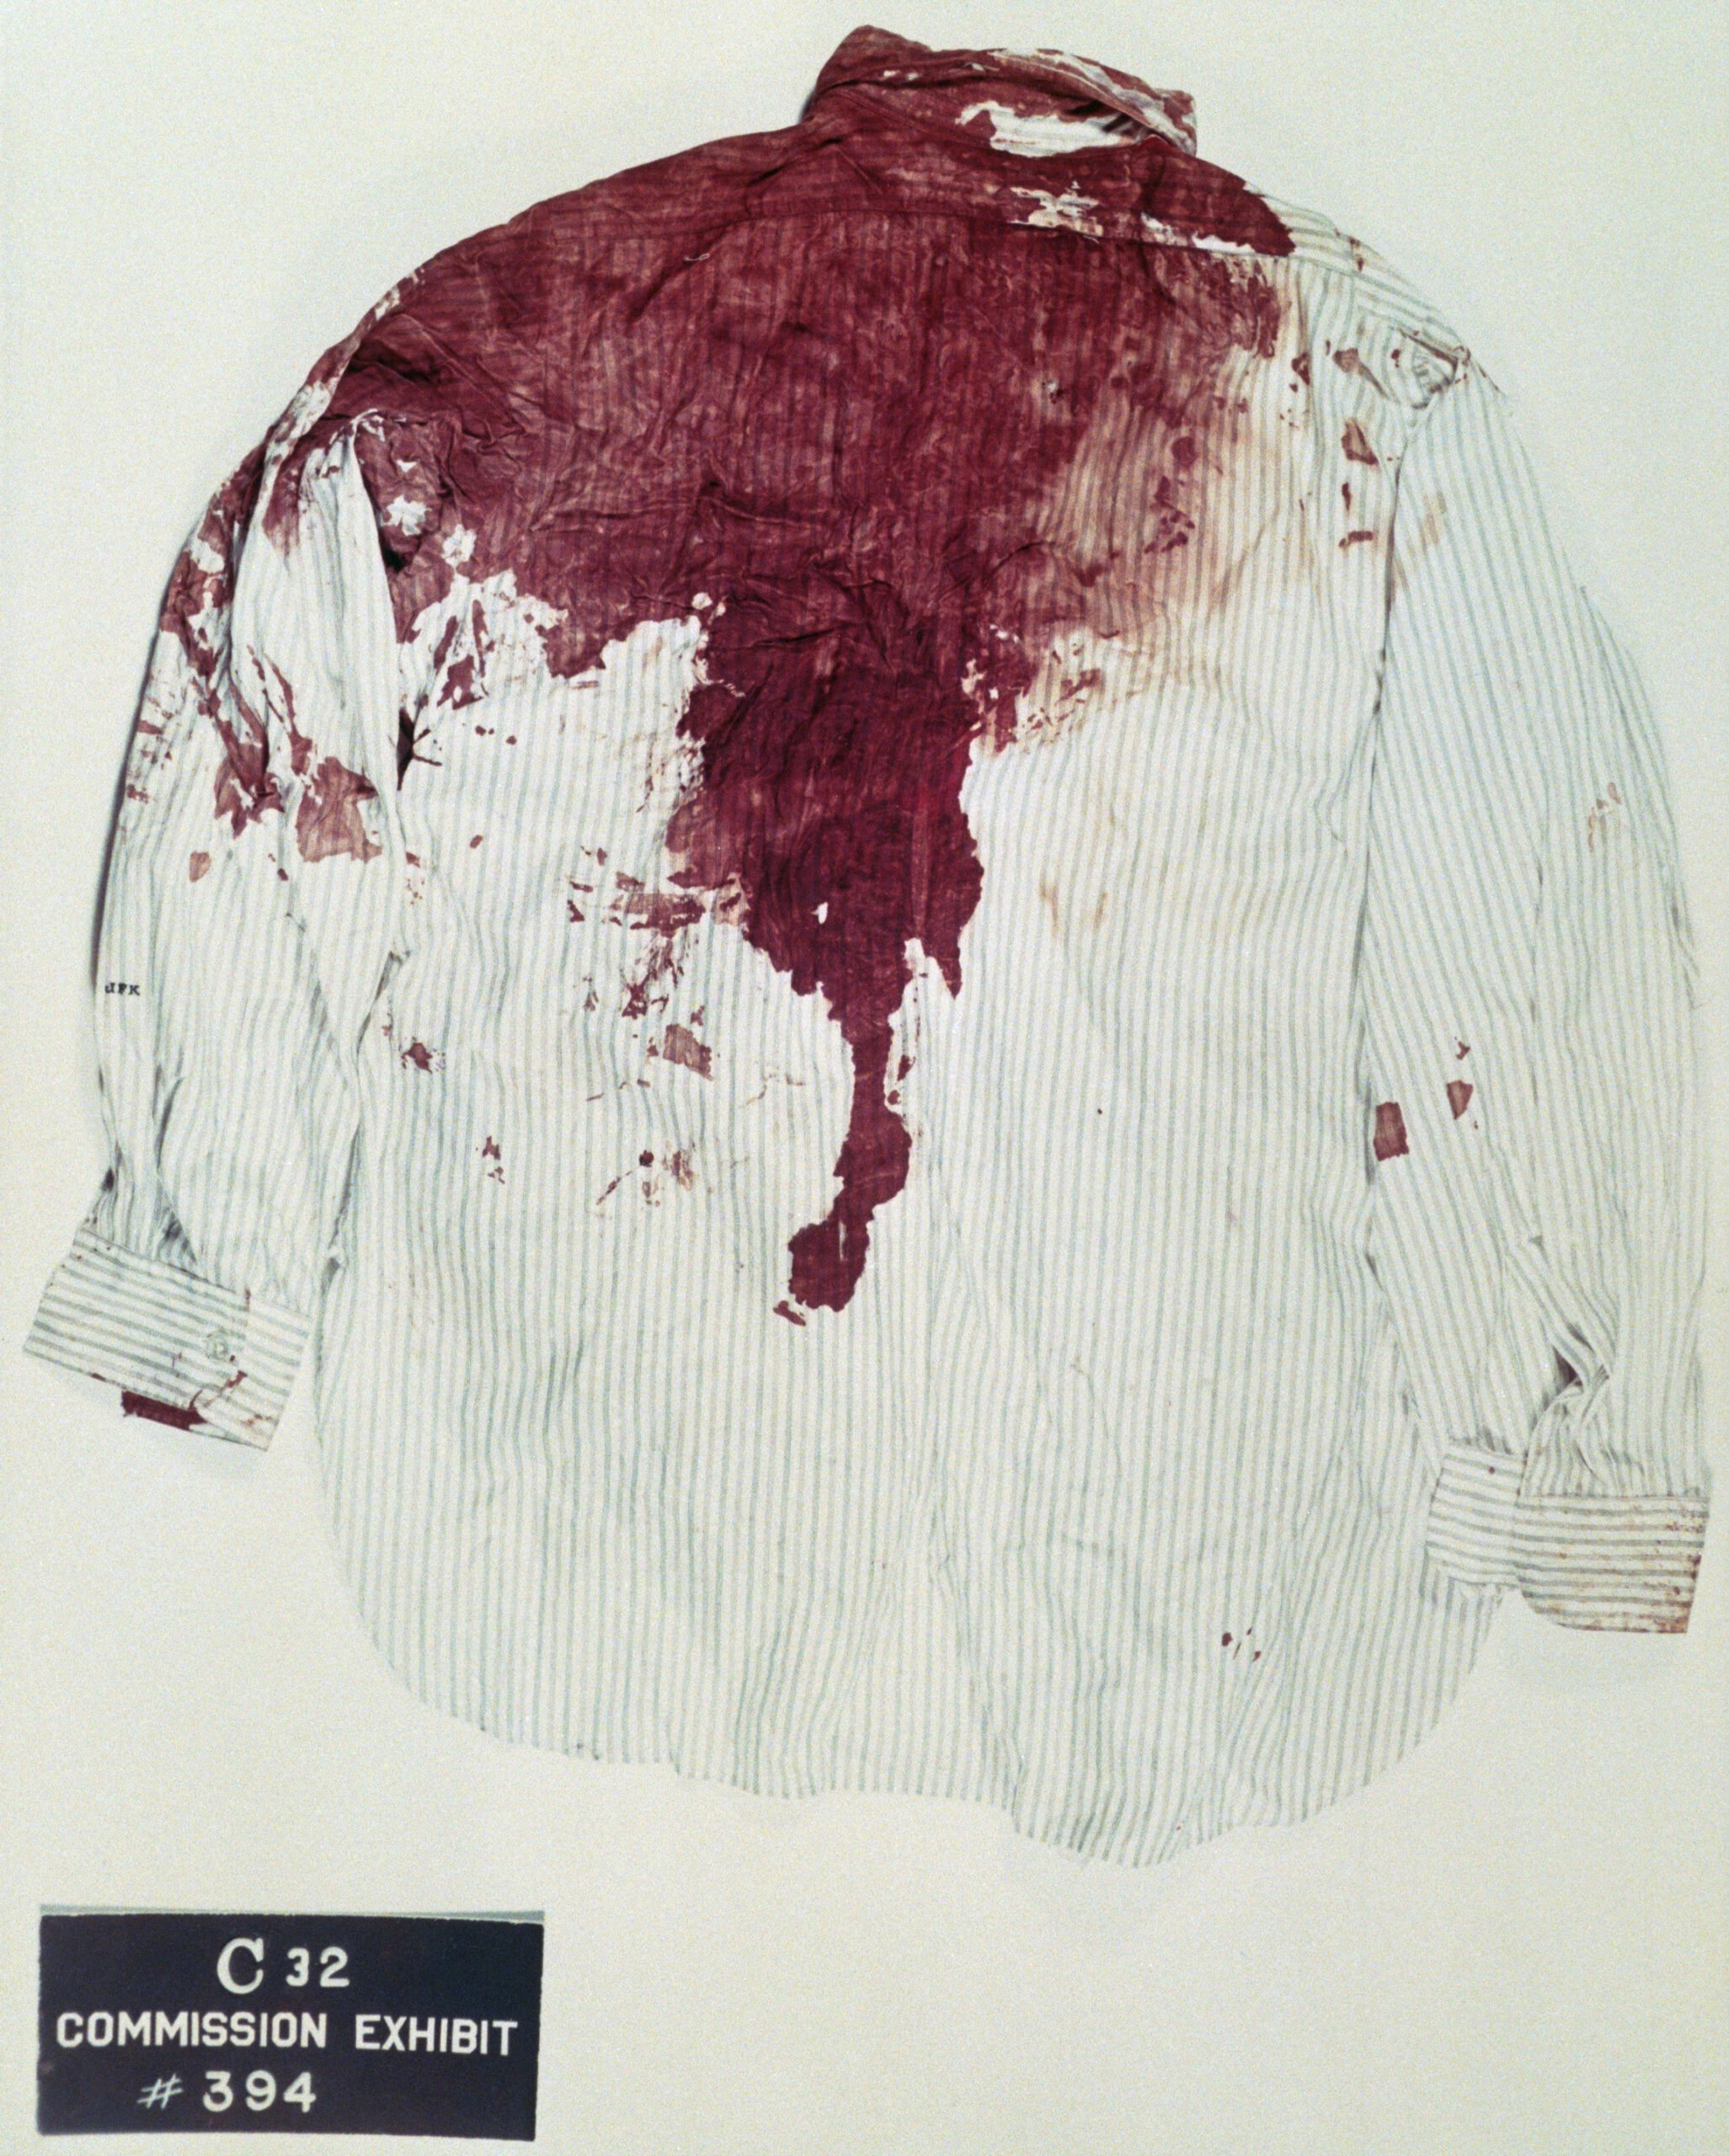 It's true that there are pictures of former US President John F. Kennedy's bloodstained bloody shirt from the day he was assassinated.